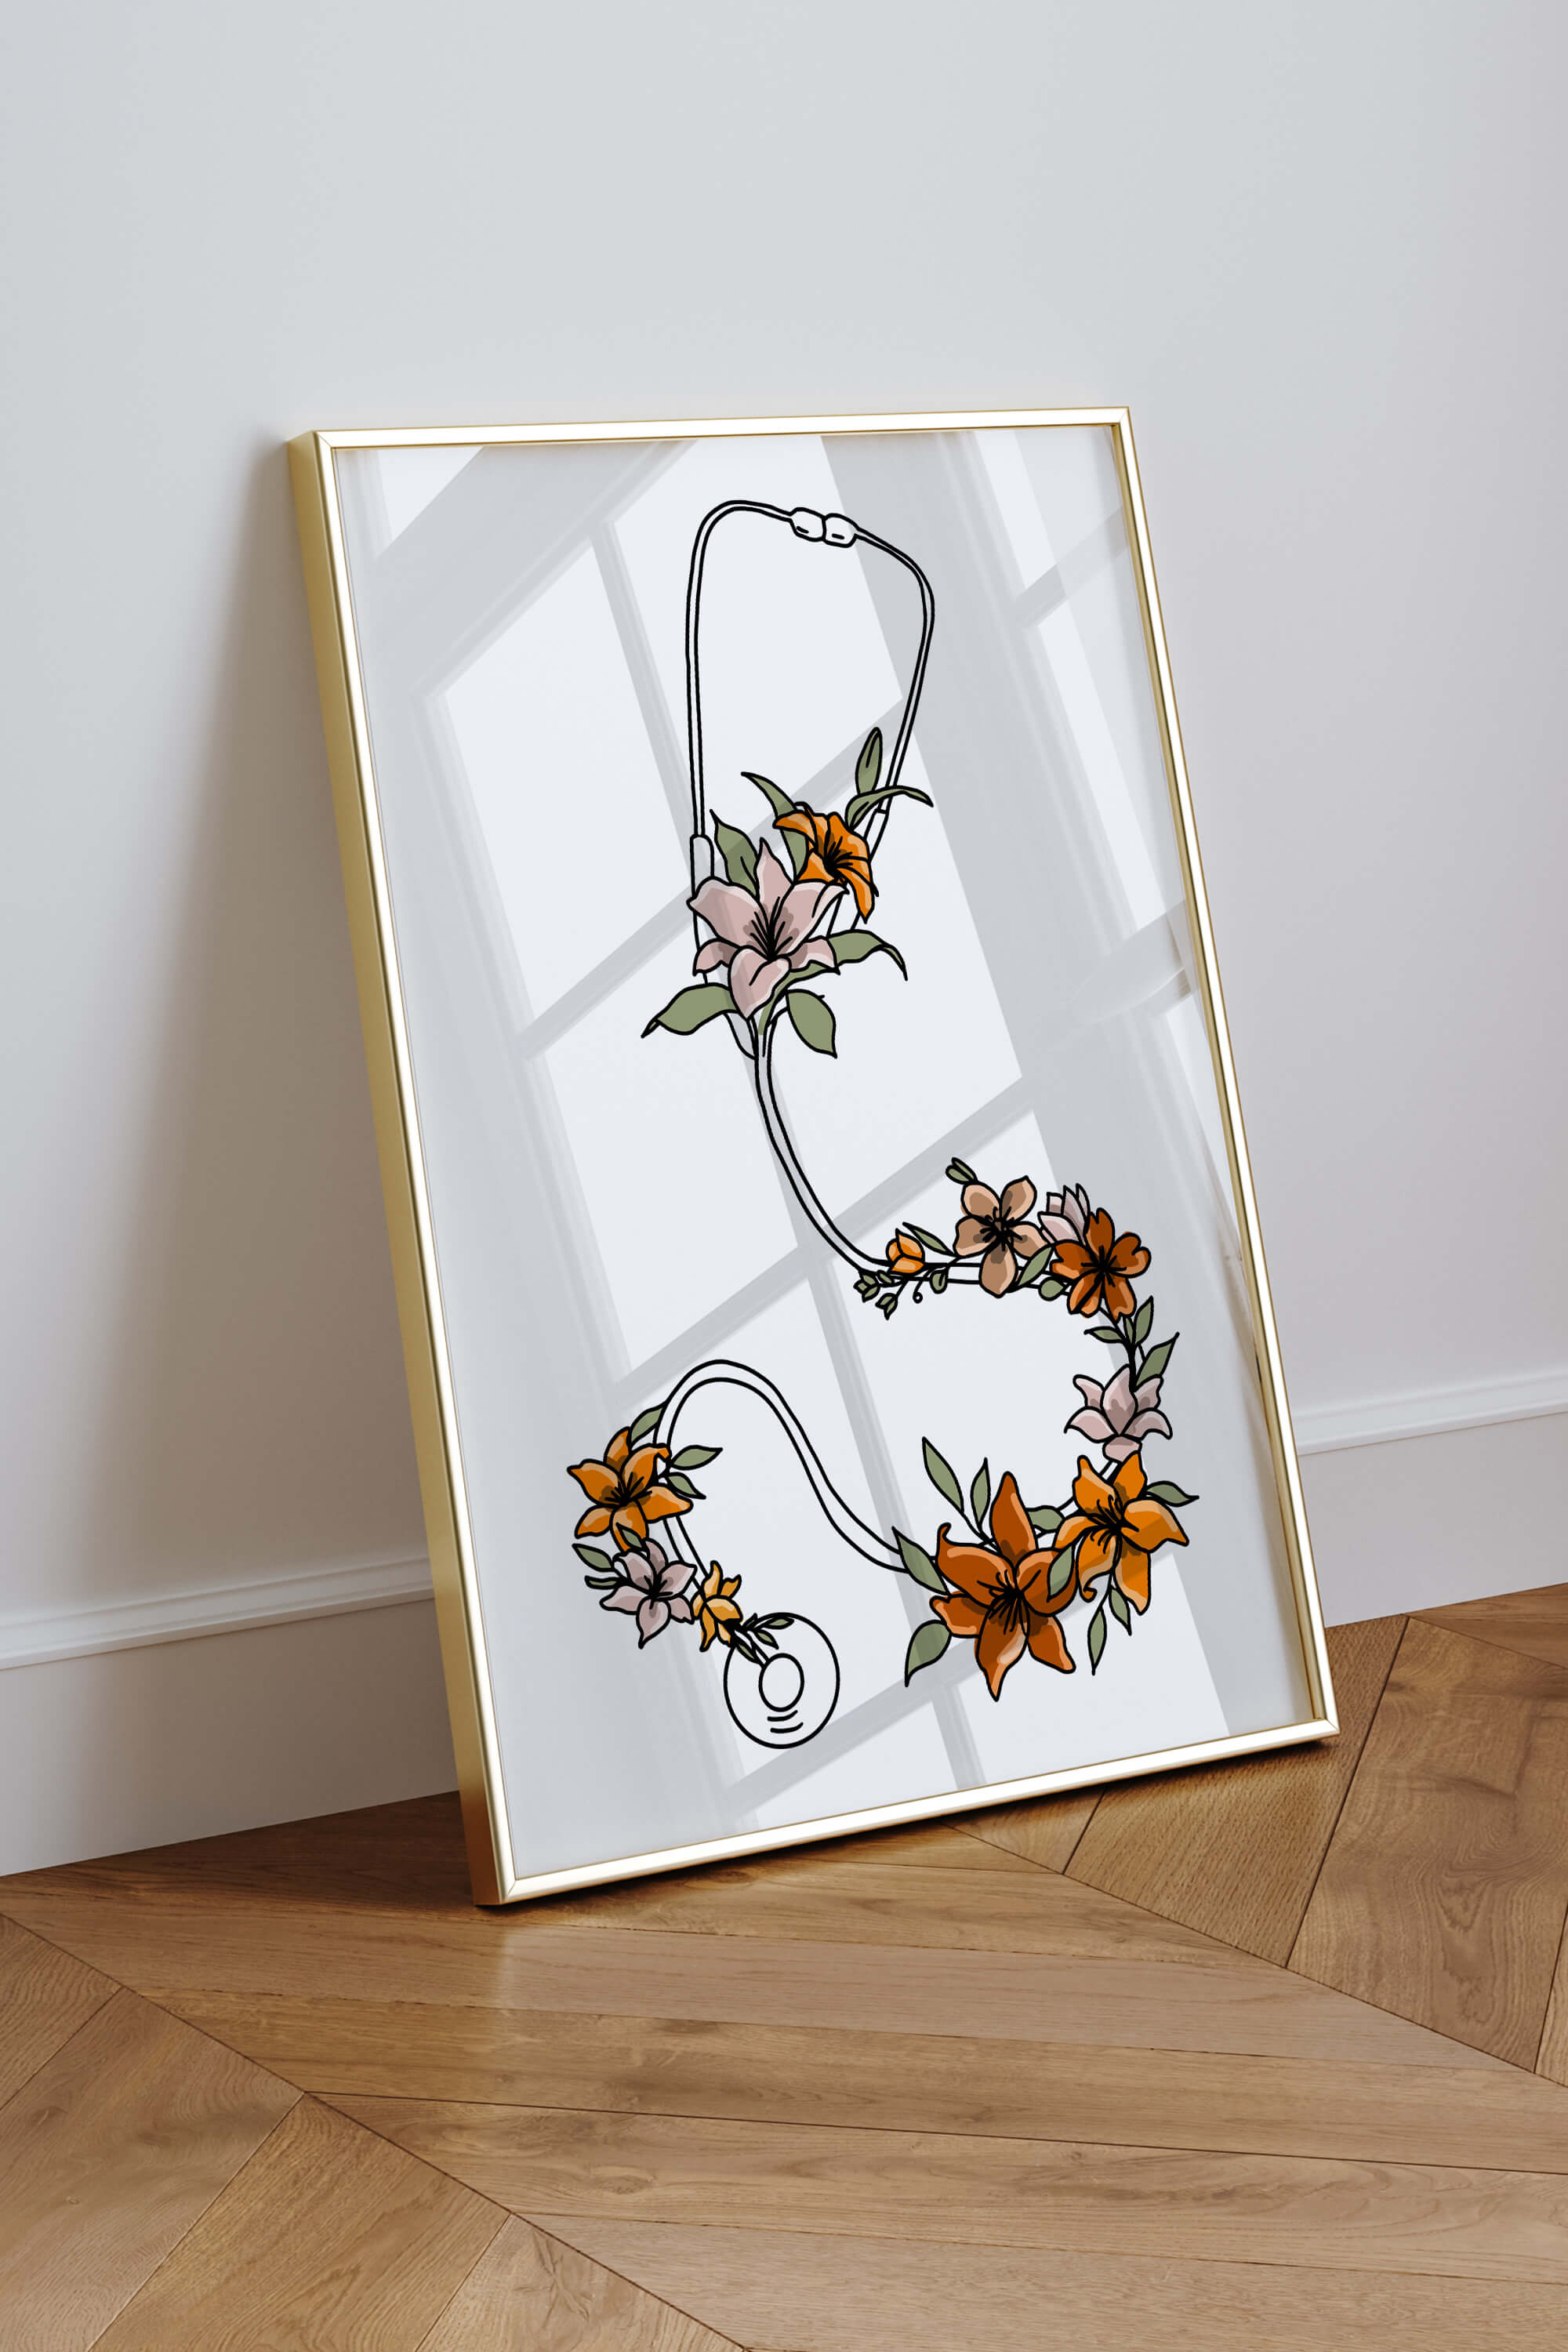 Medical professional stethoscope artwork with floral design, a thoughtful gift for nurses and doctors.